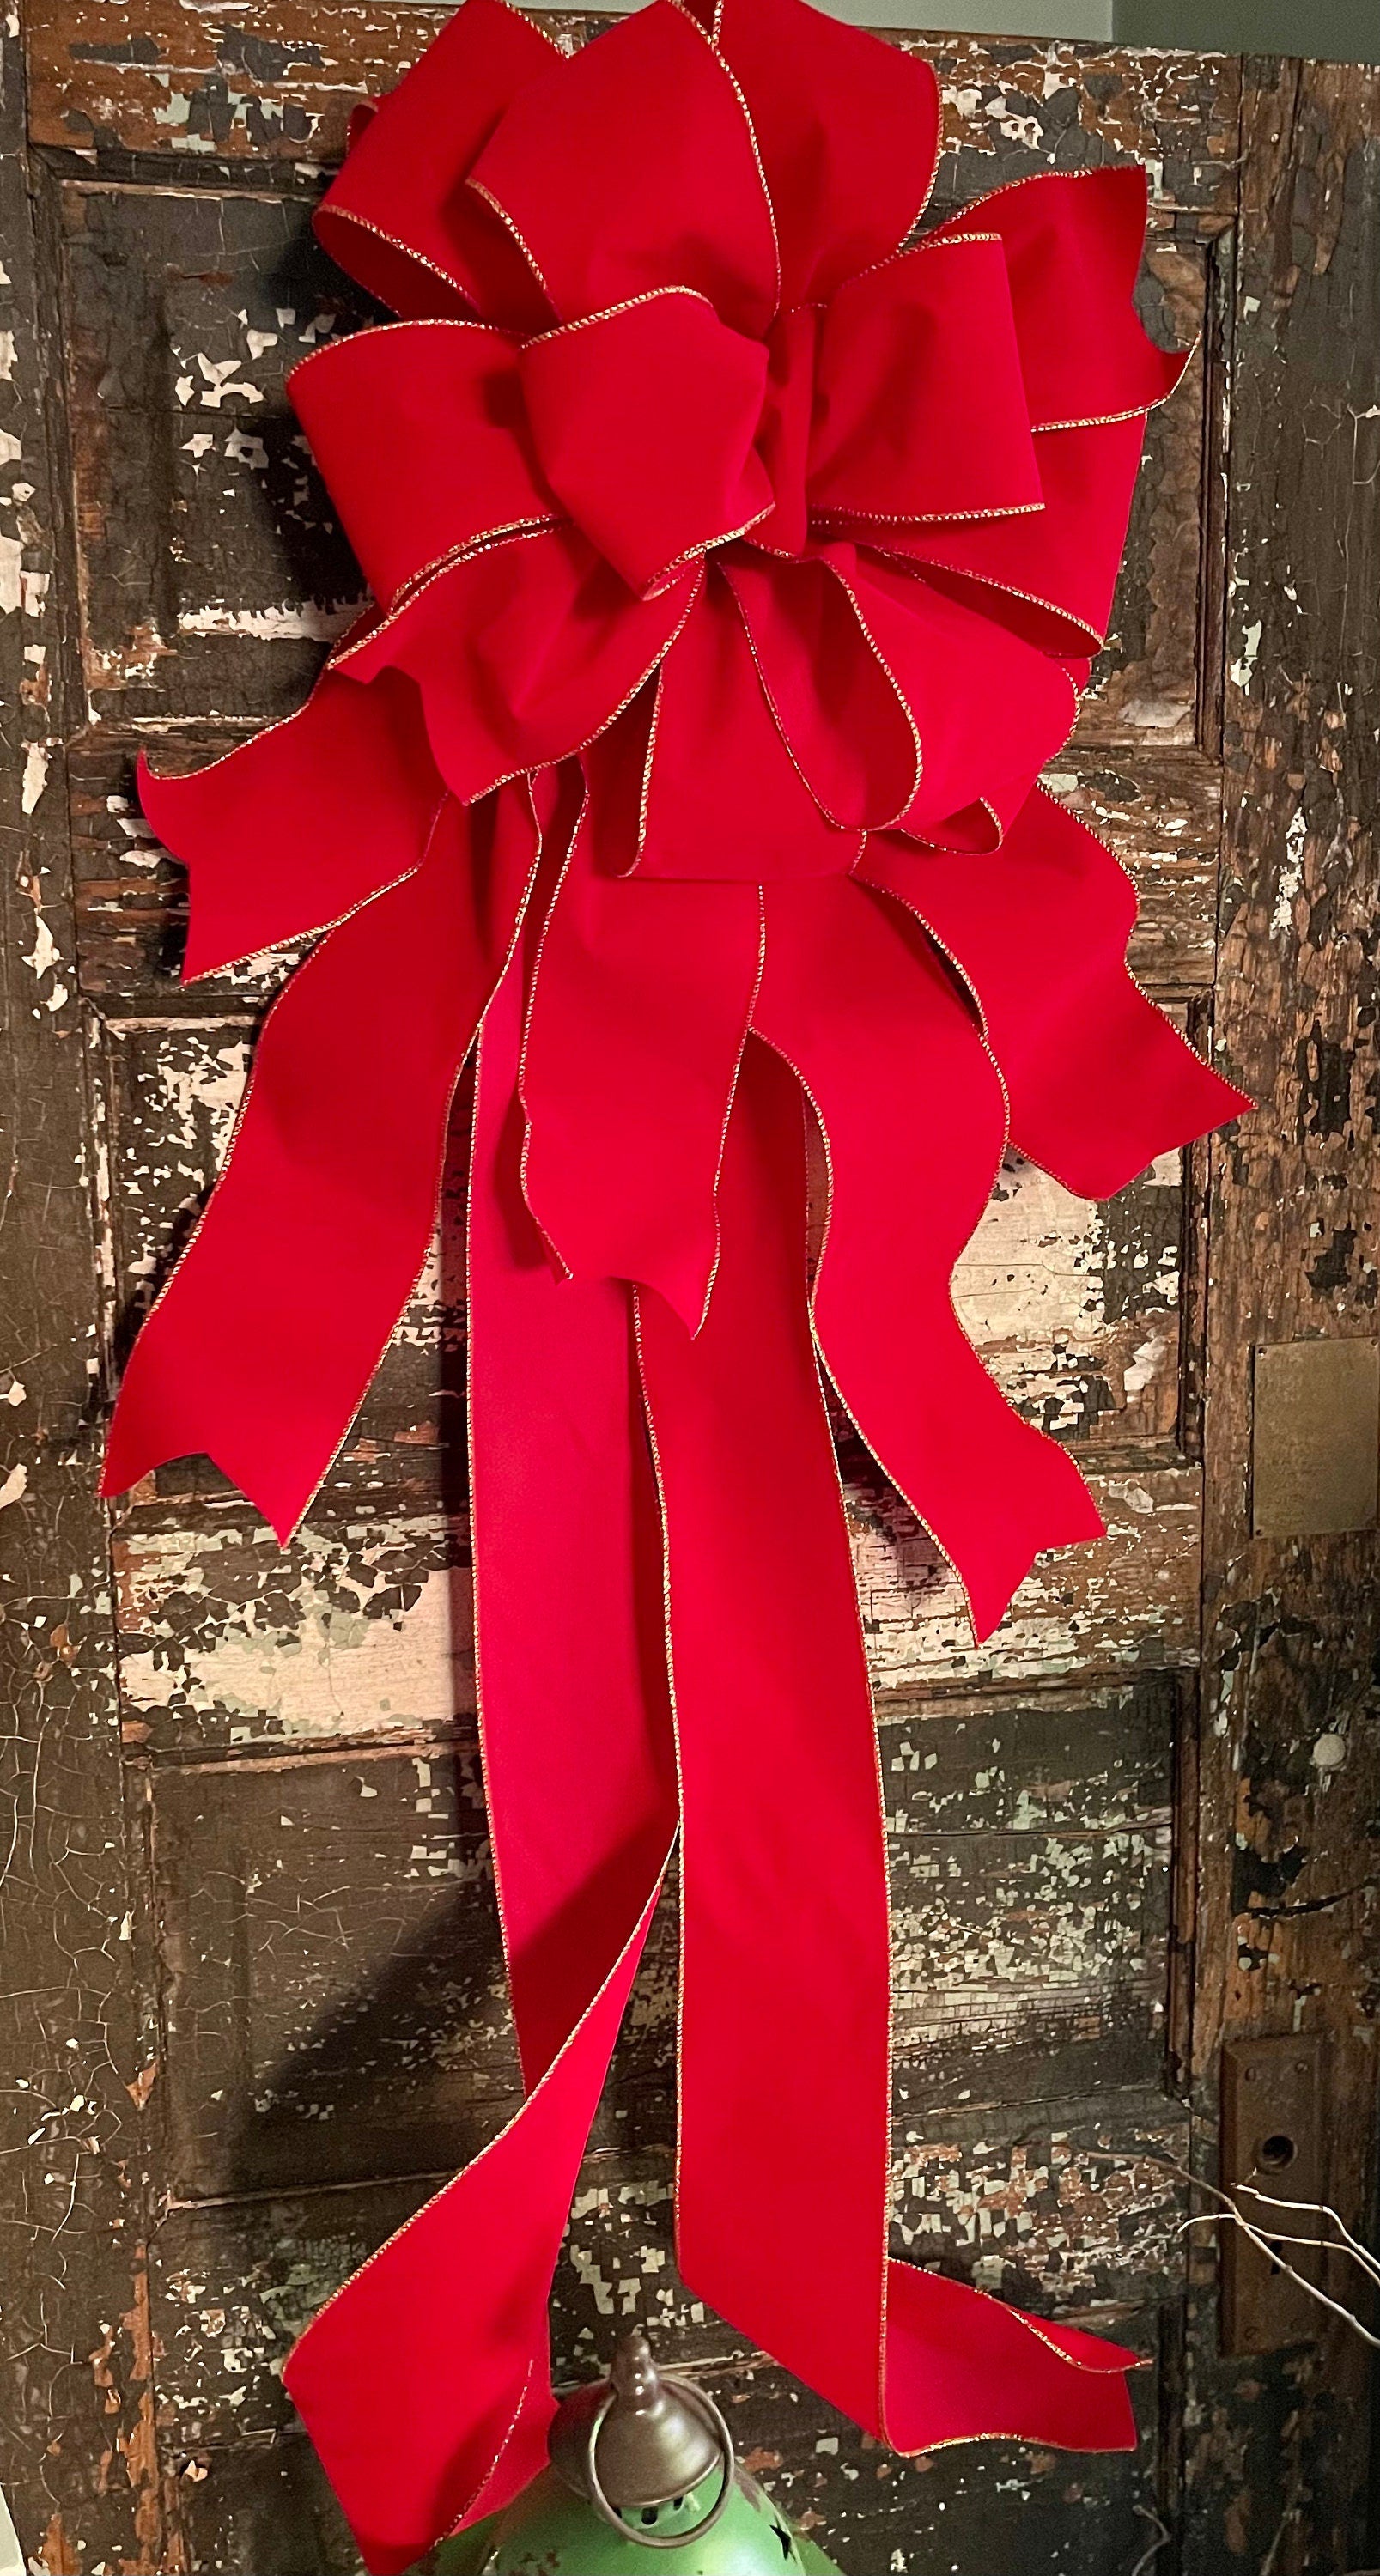 Red Bows for Wreaths Large Red Felt Bows Christmas Red Bows Red Bow Tree  Topper